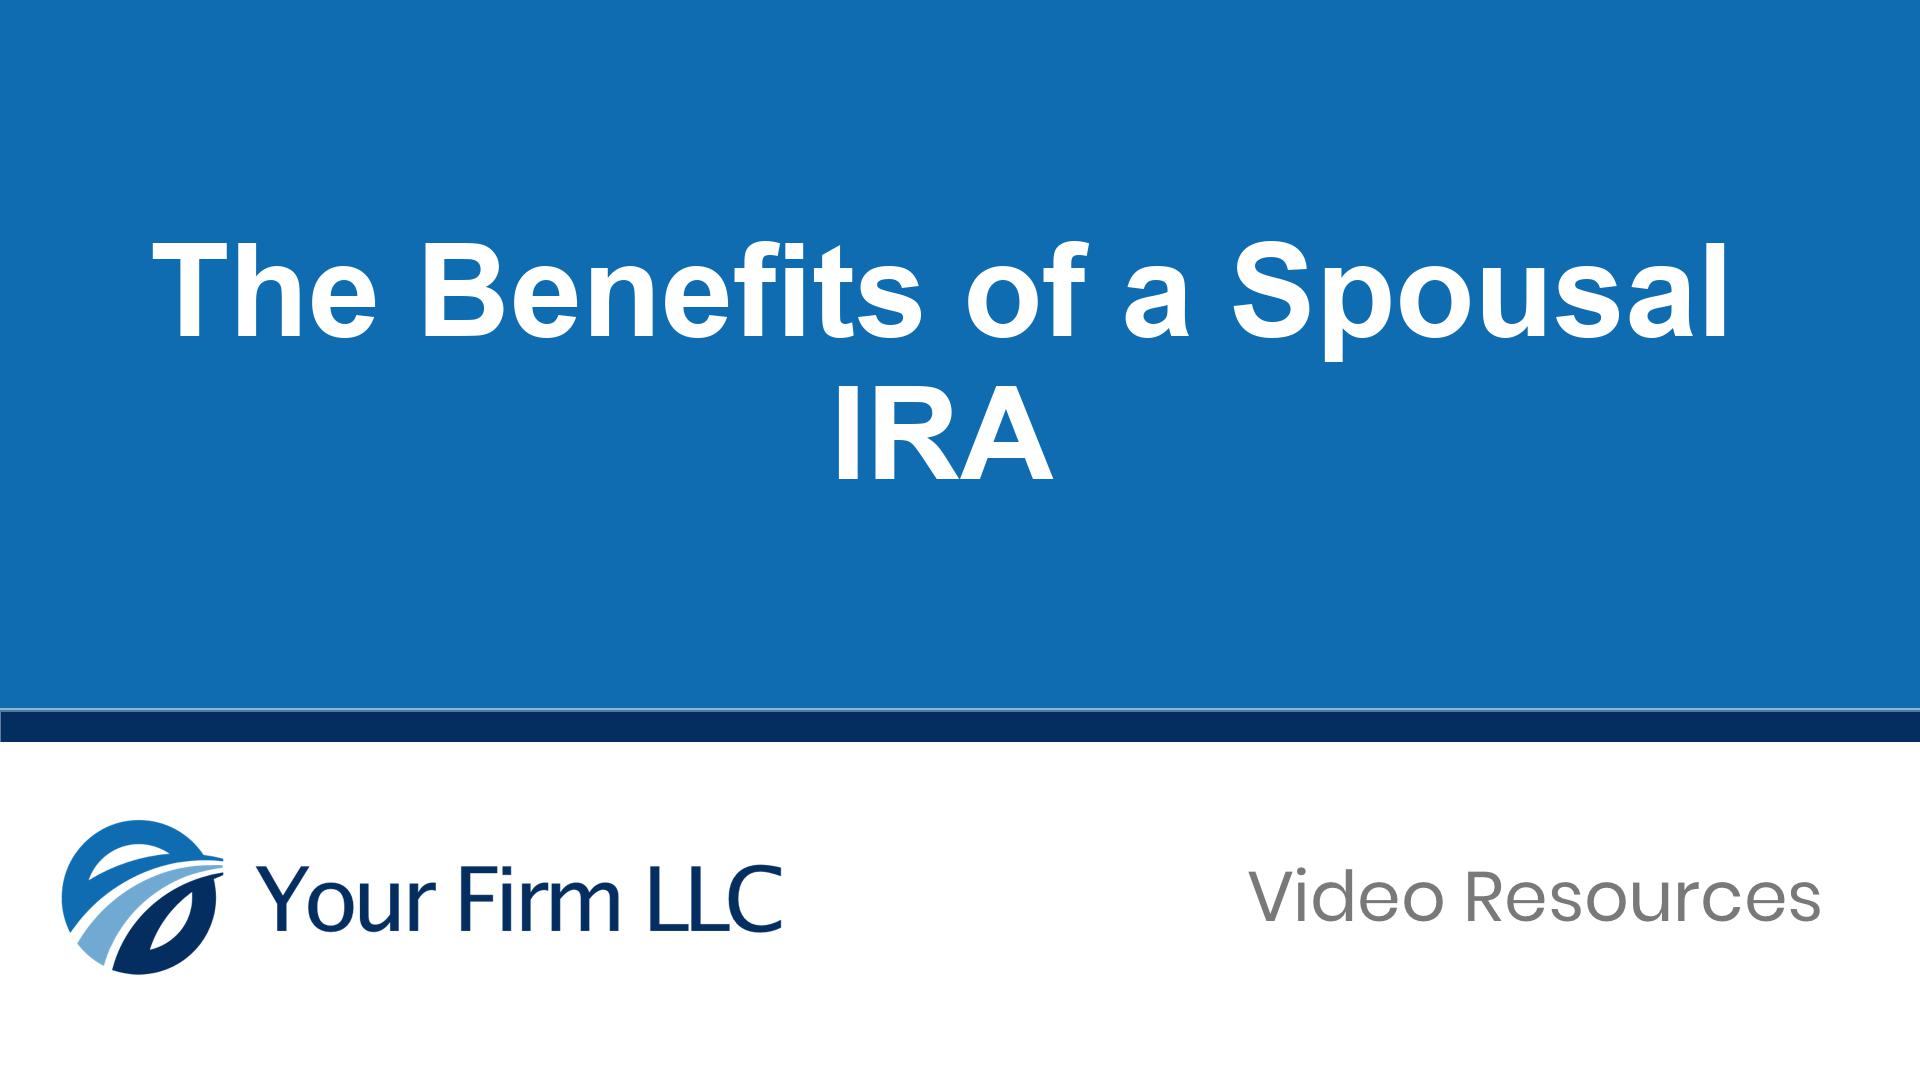 The Benefits of a Spousal IRA